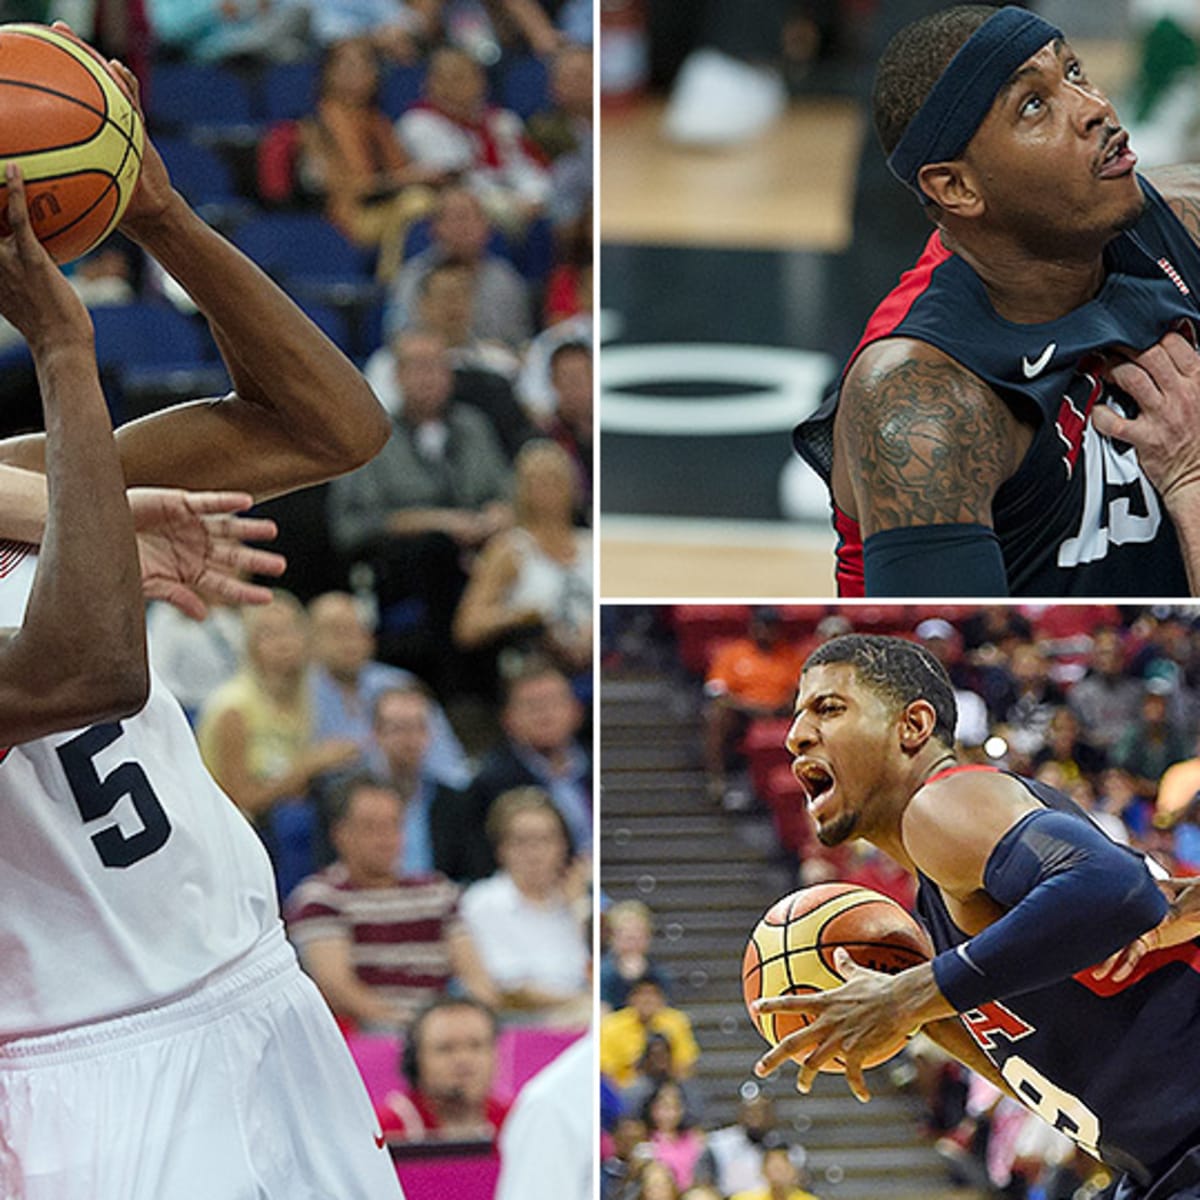 USA basketball team 2016 Olympics: Roster disappoints - Sports